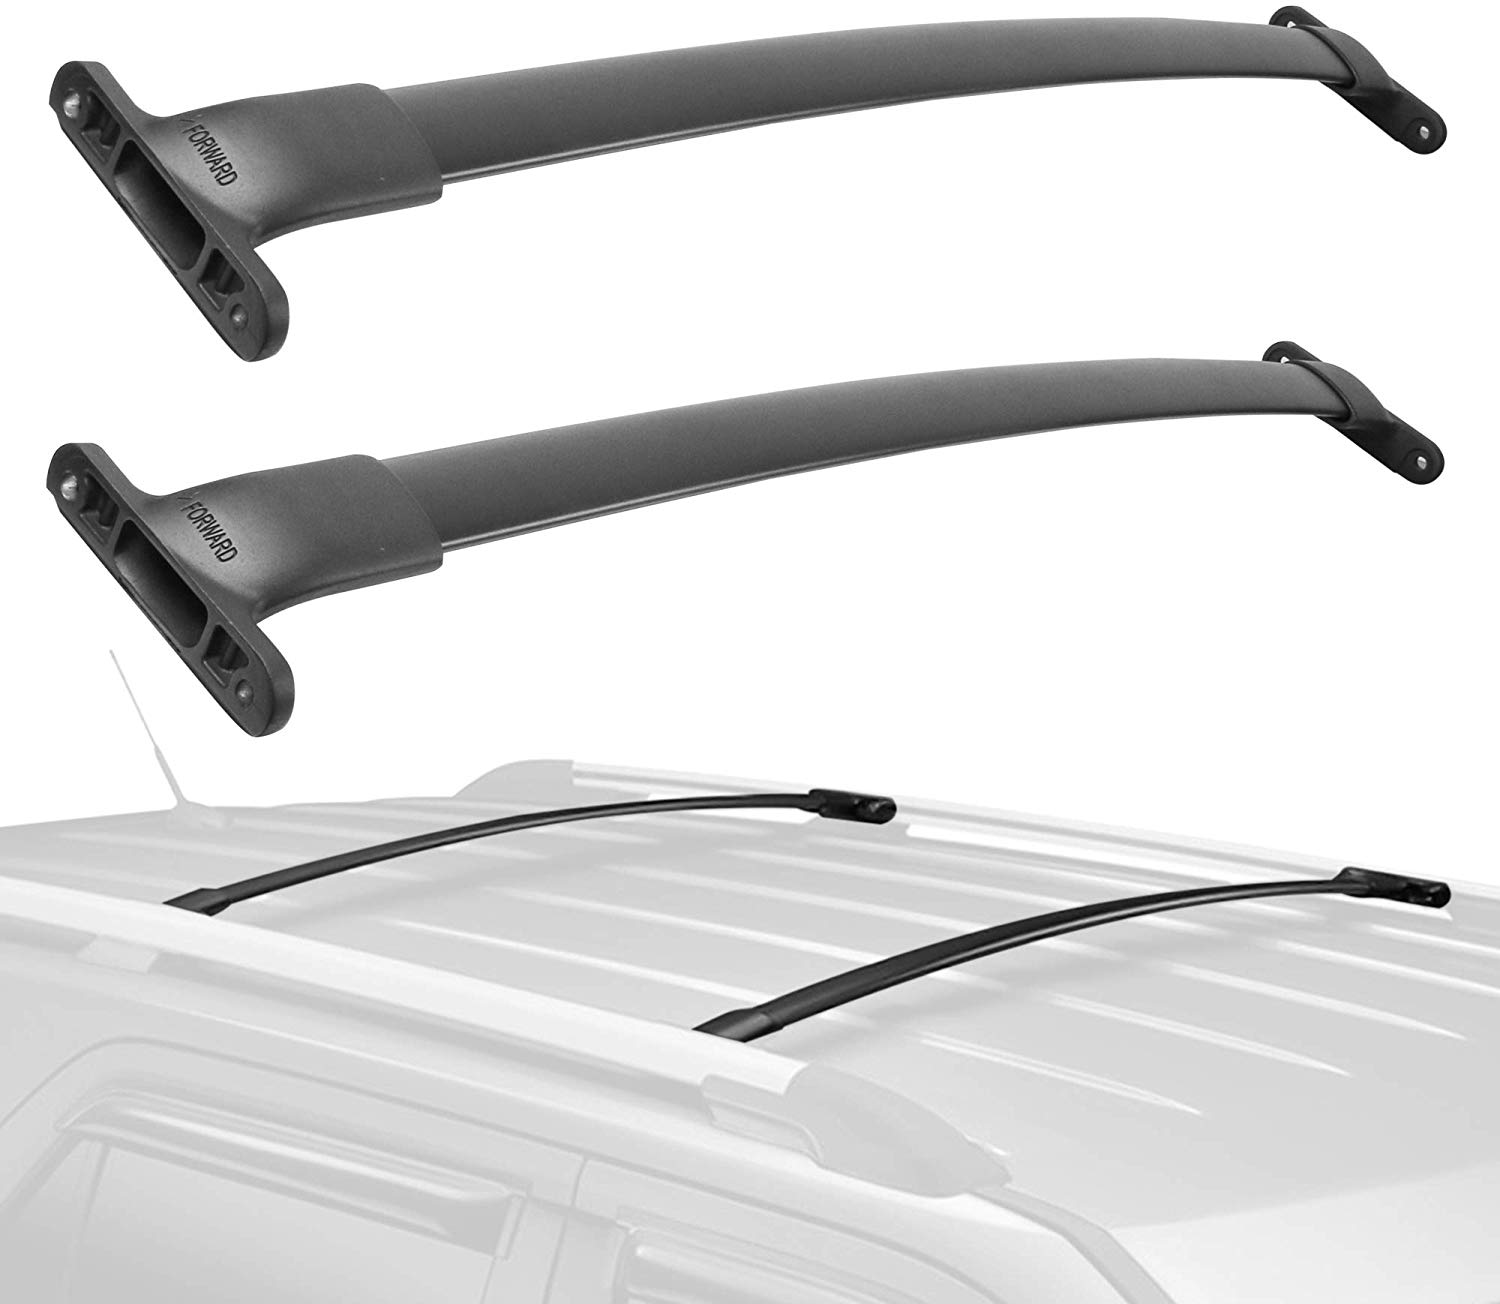 Lot Detail - ROOF RACK CROSSBARS FOR 2016, 2017,2018 & 2019 FORD EXPLORER 2018 Ford Explorer Roof Rack Delete Kit